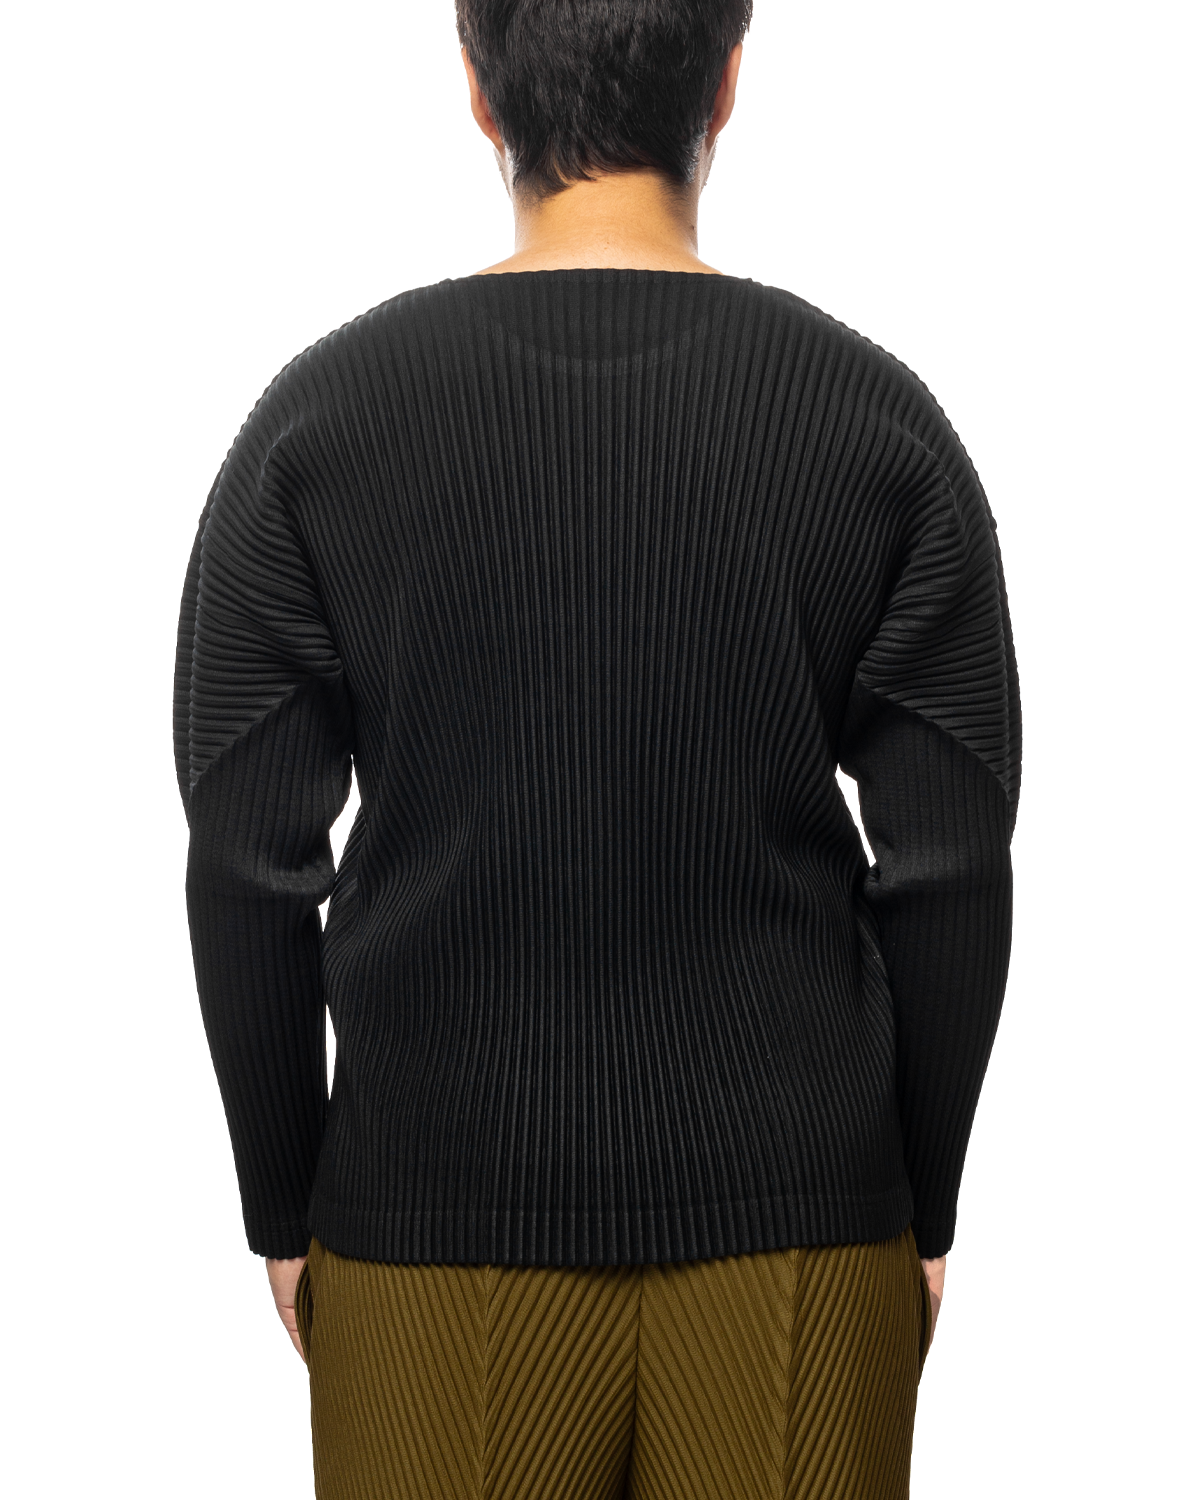 Monthly Color January Long Sleeve T-Shirt Black (no.15)